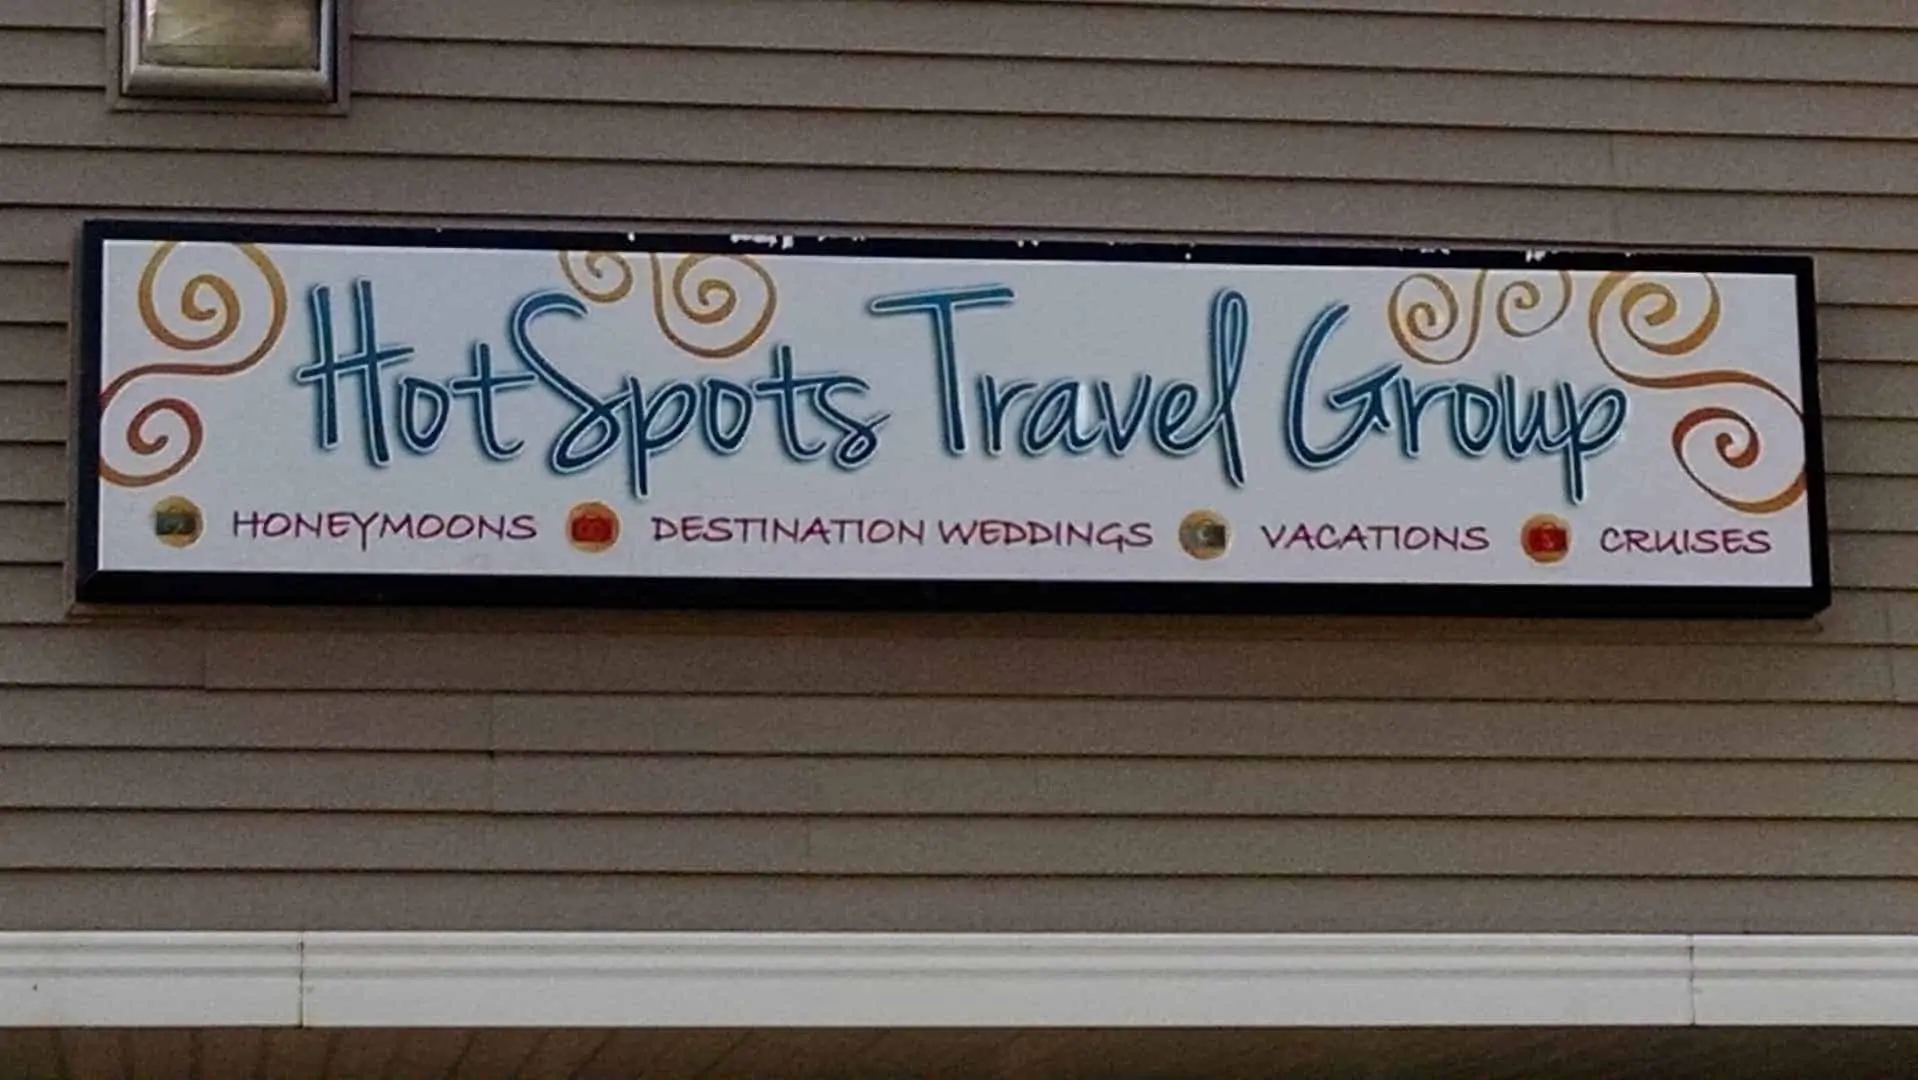 hot spots travel group outside sign